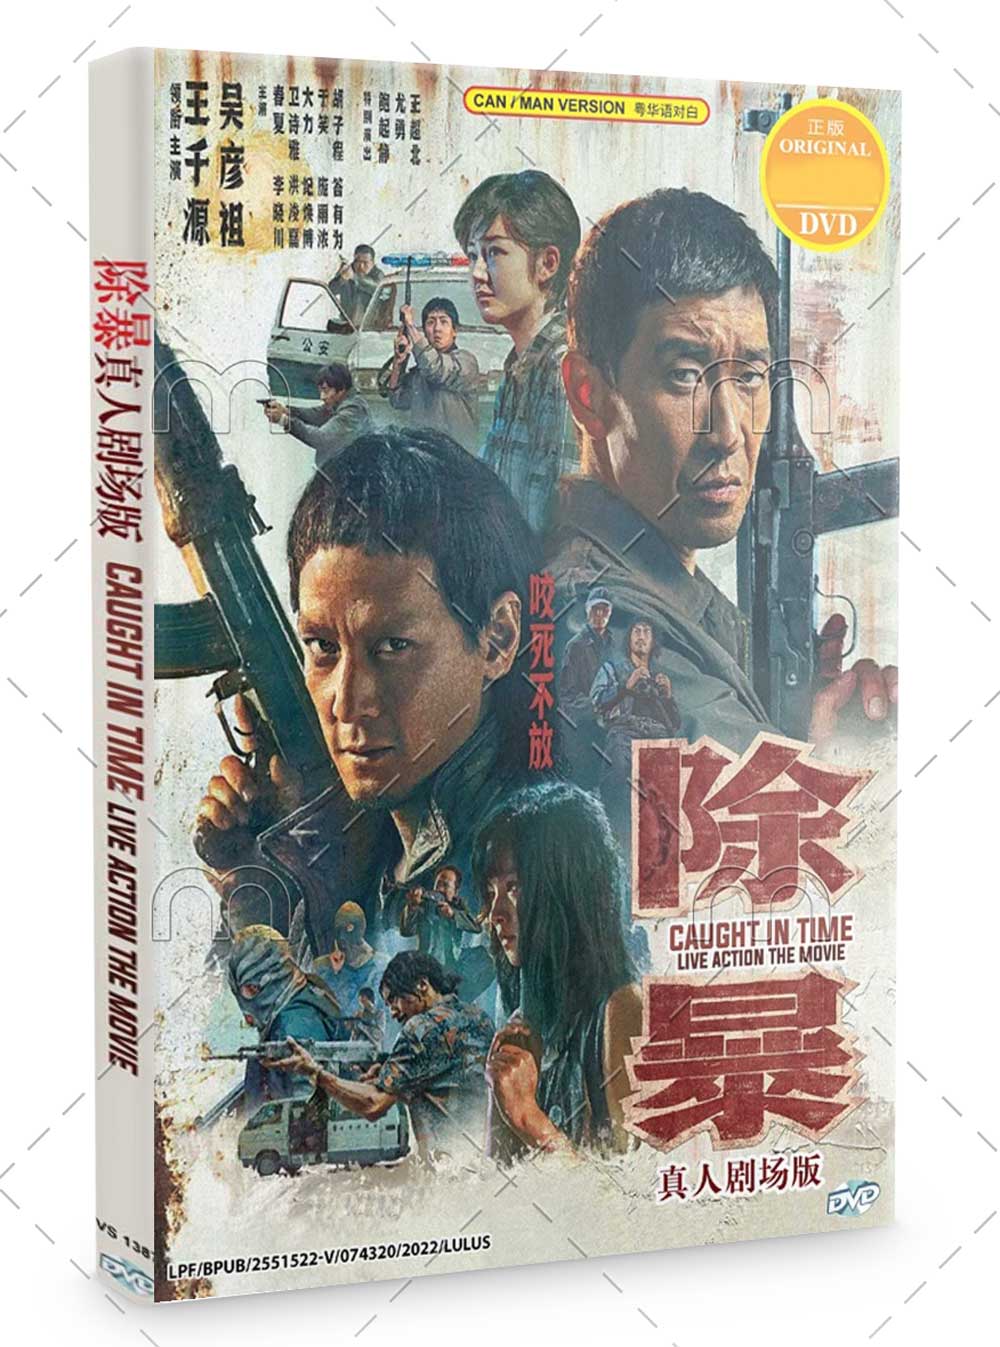 Caught In Time (DVD) (2020) Hong Kong Movie